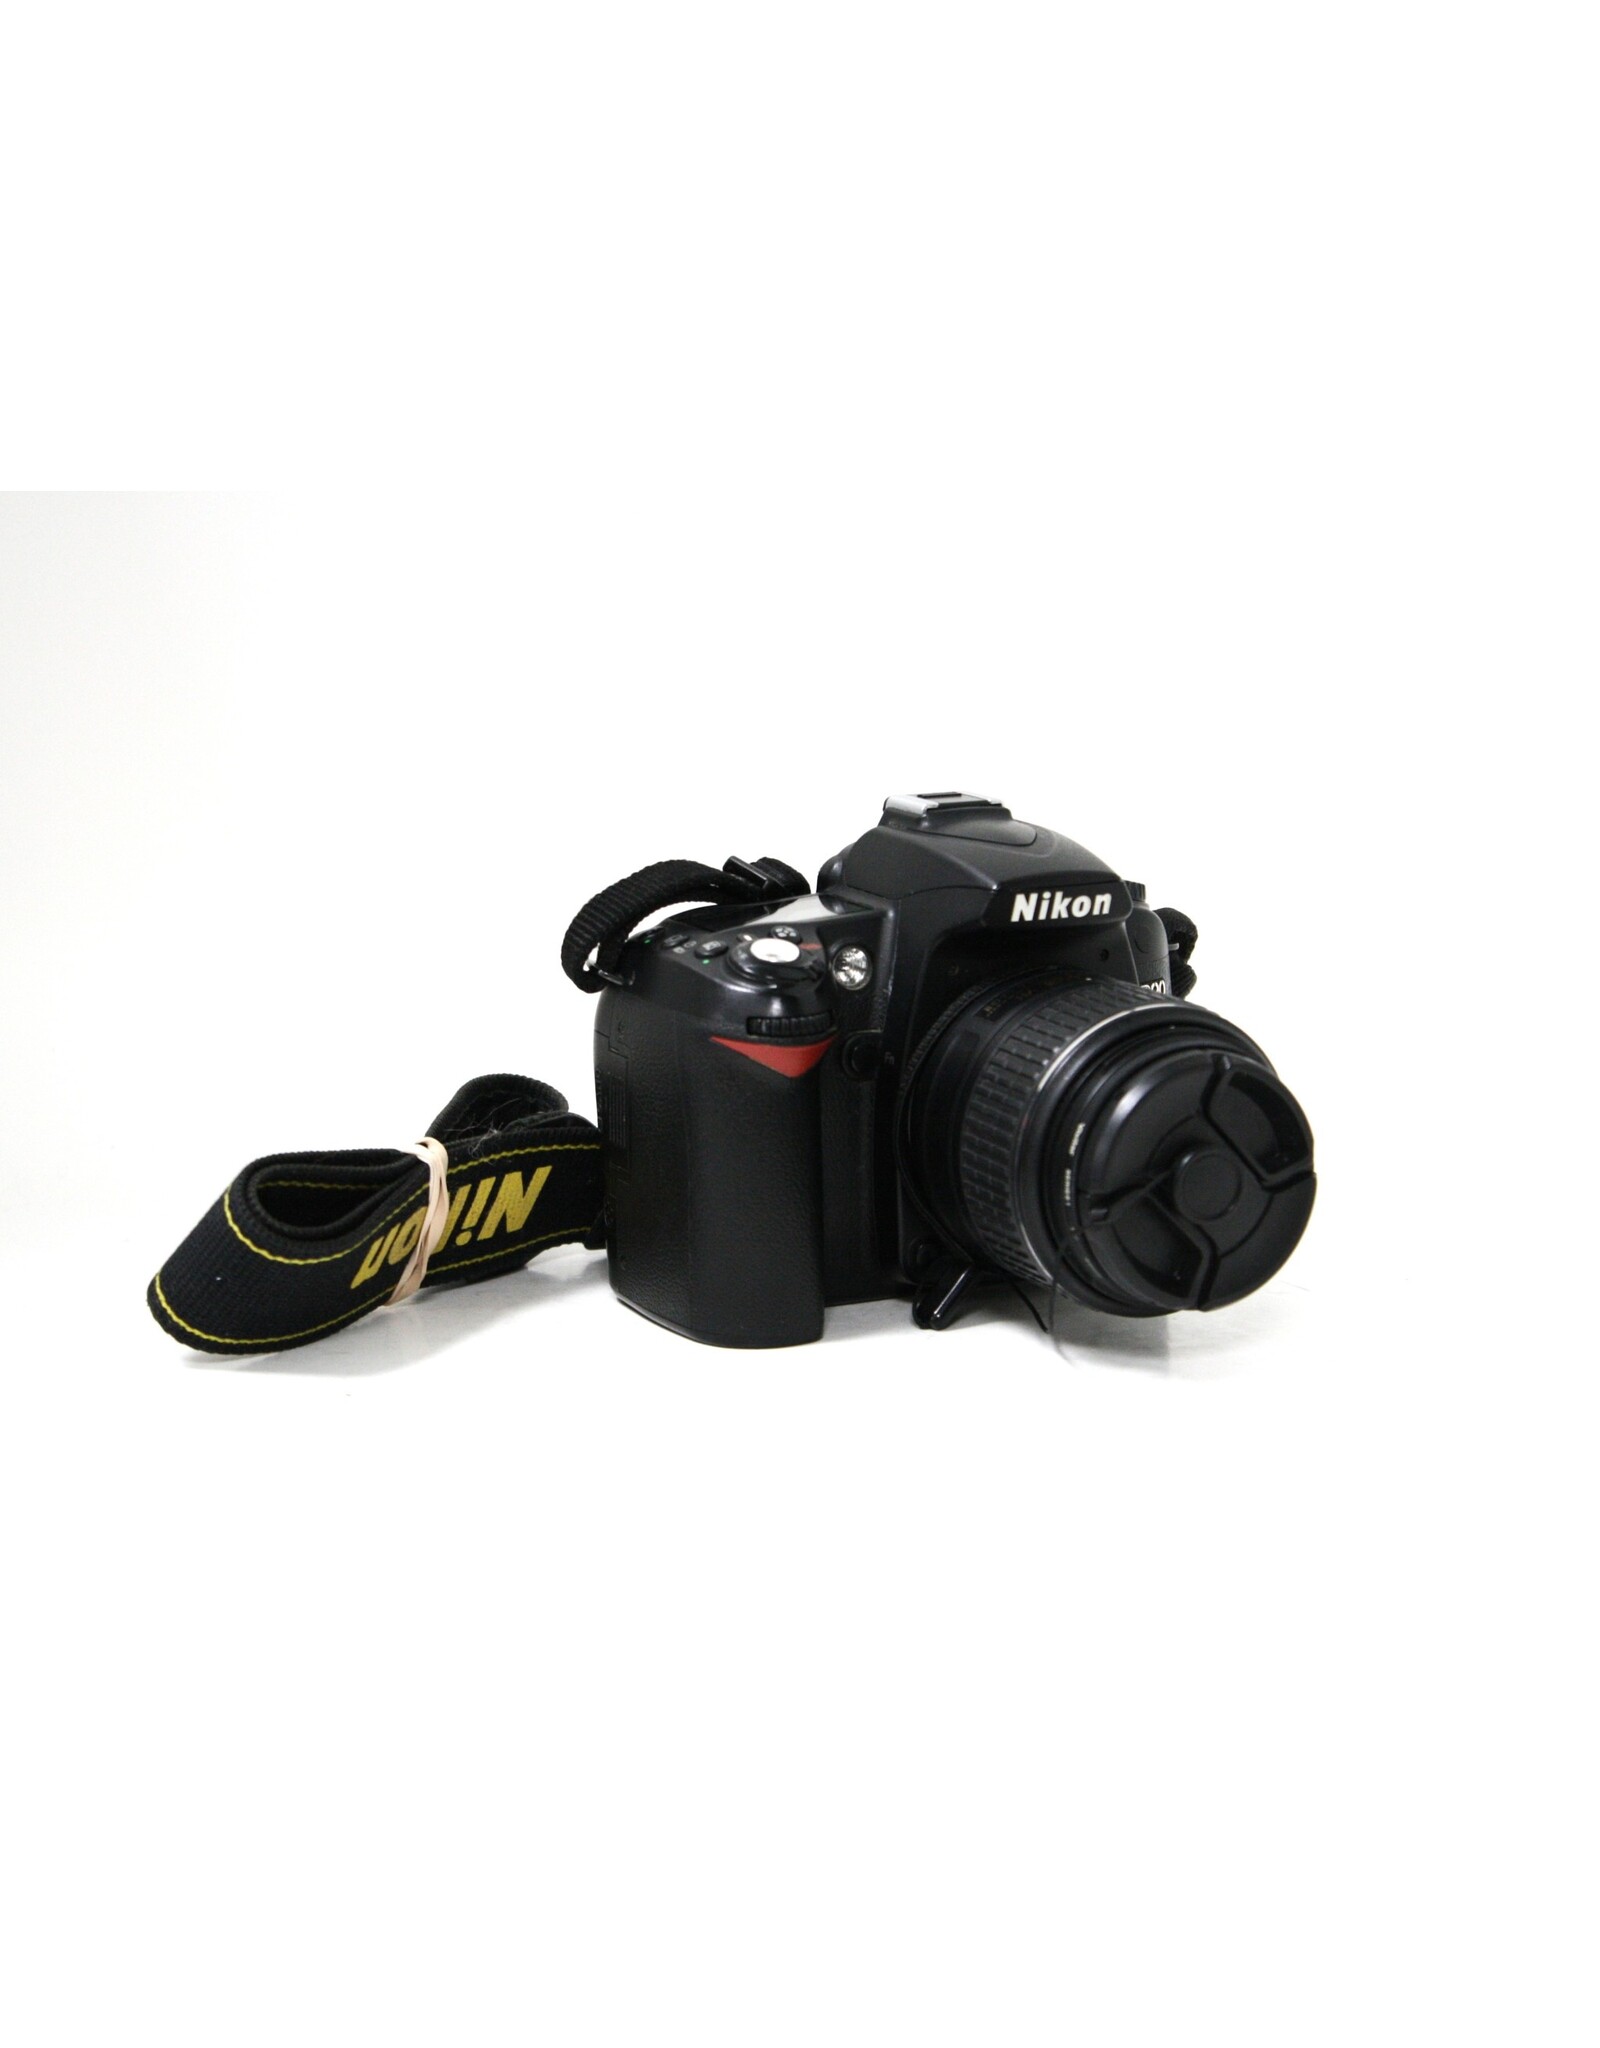 Nikon Nikon D90 12.3 MP Two Lens Deluxe Outfit w 18-55mm 3.5-5.6 VR & 55-200mm Lens & Bag (Pre-owned)